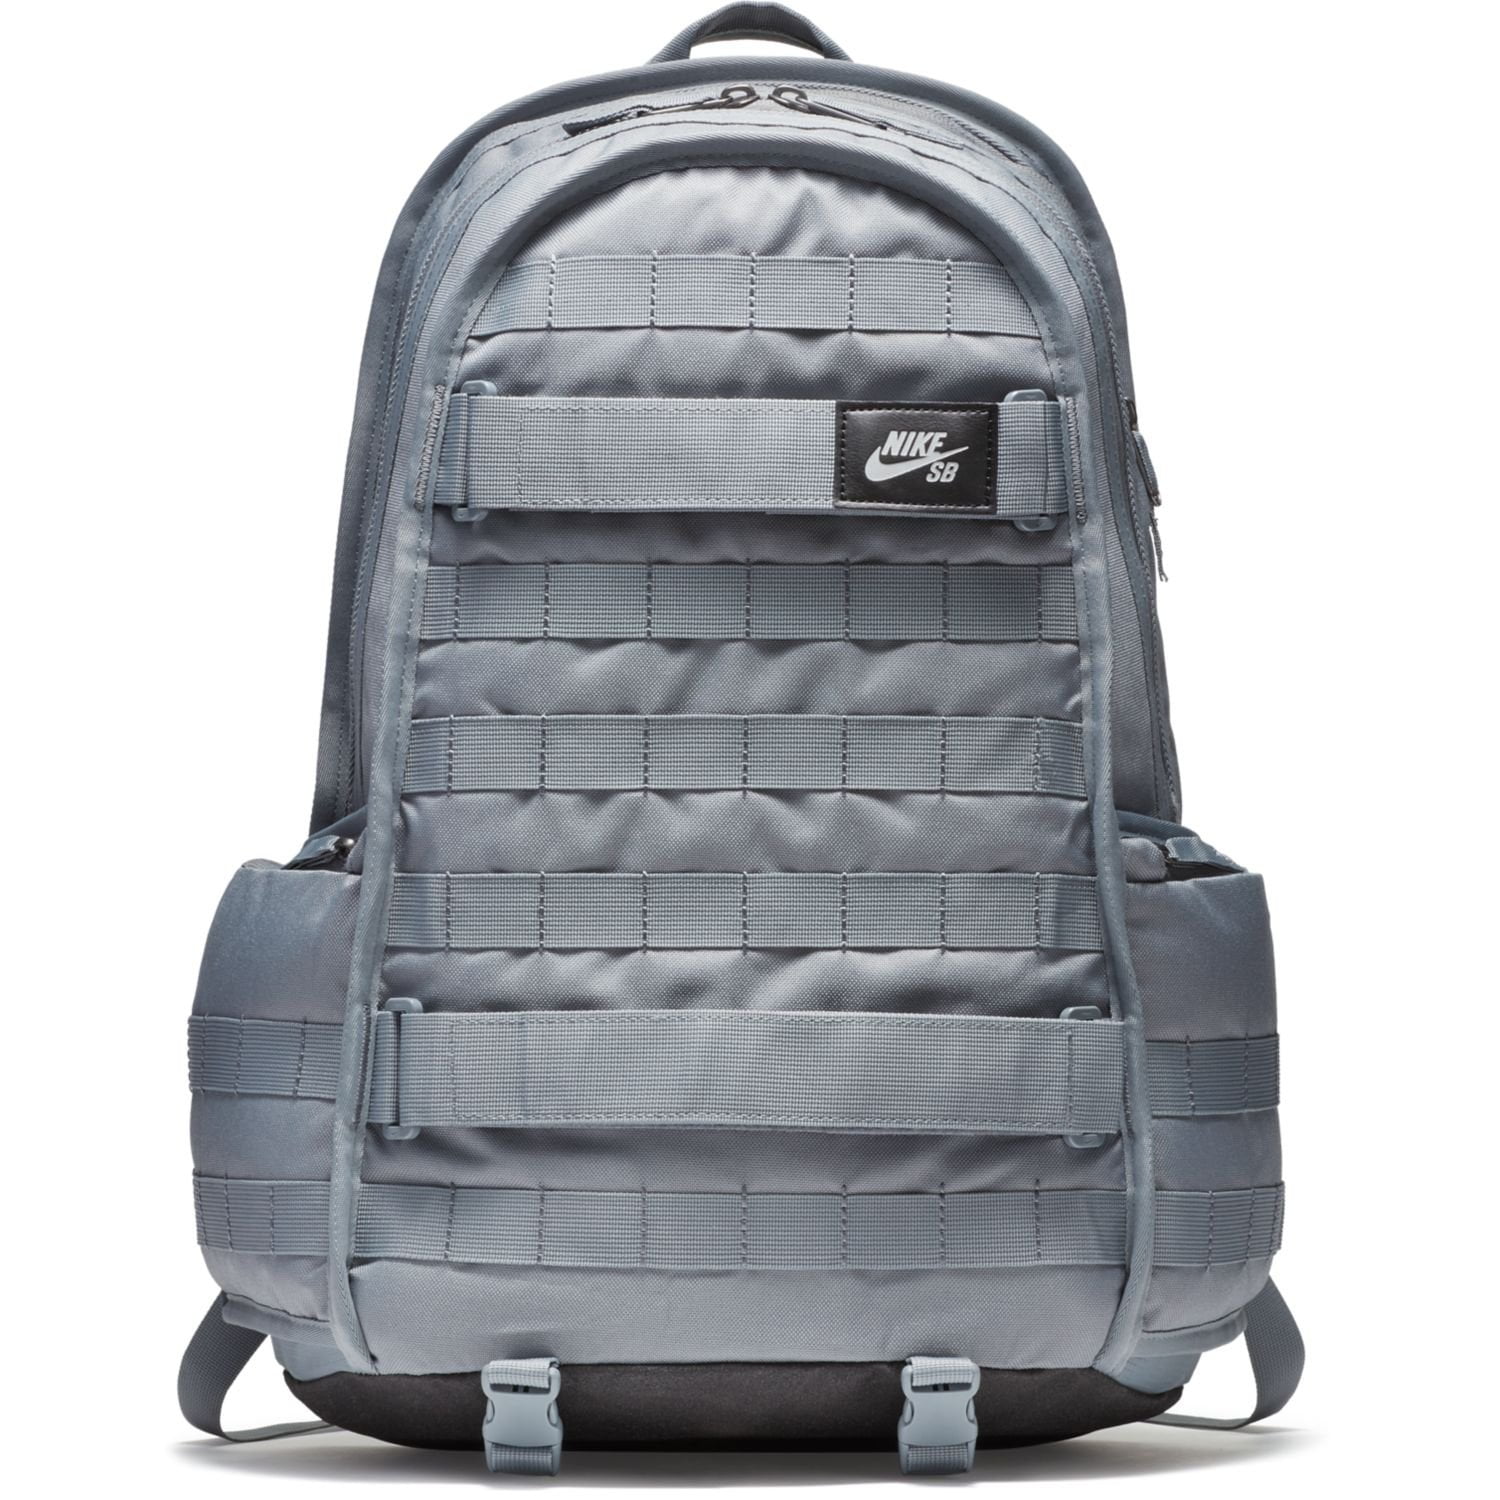 Nike SB RPM Solid Backpack Cool Grey 